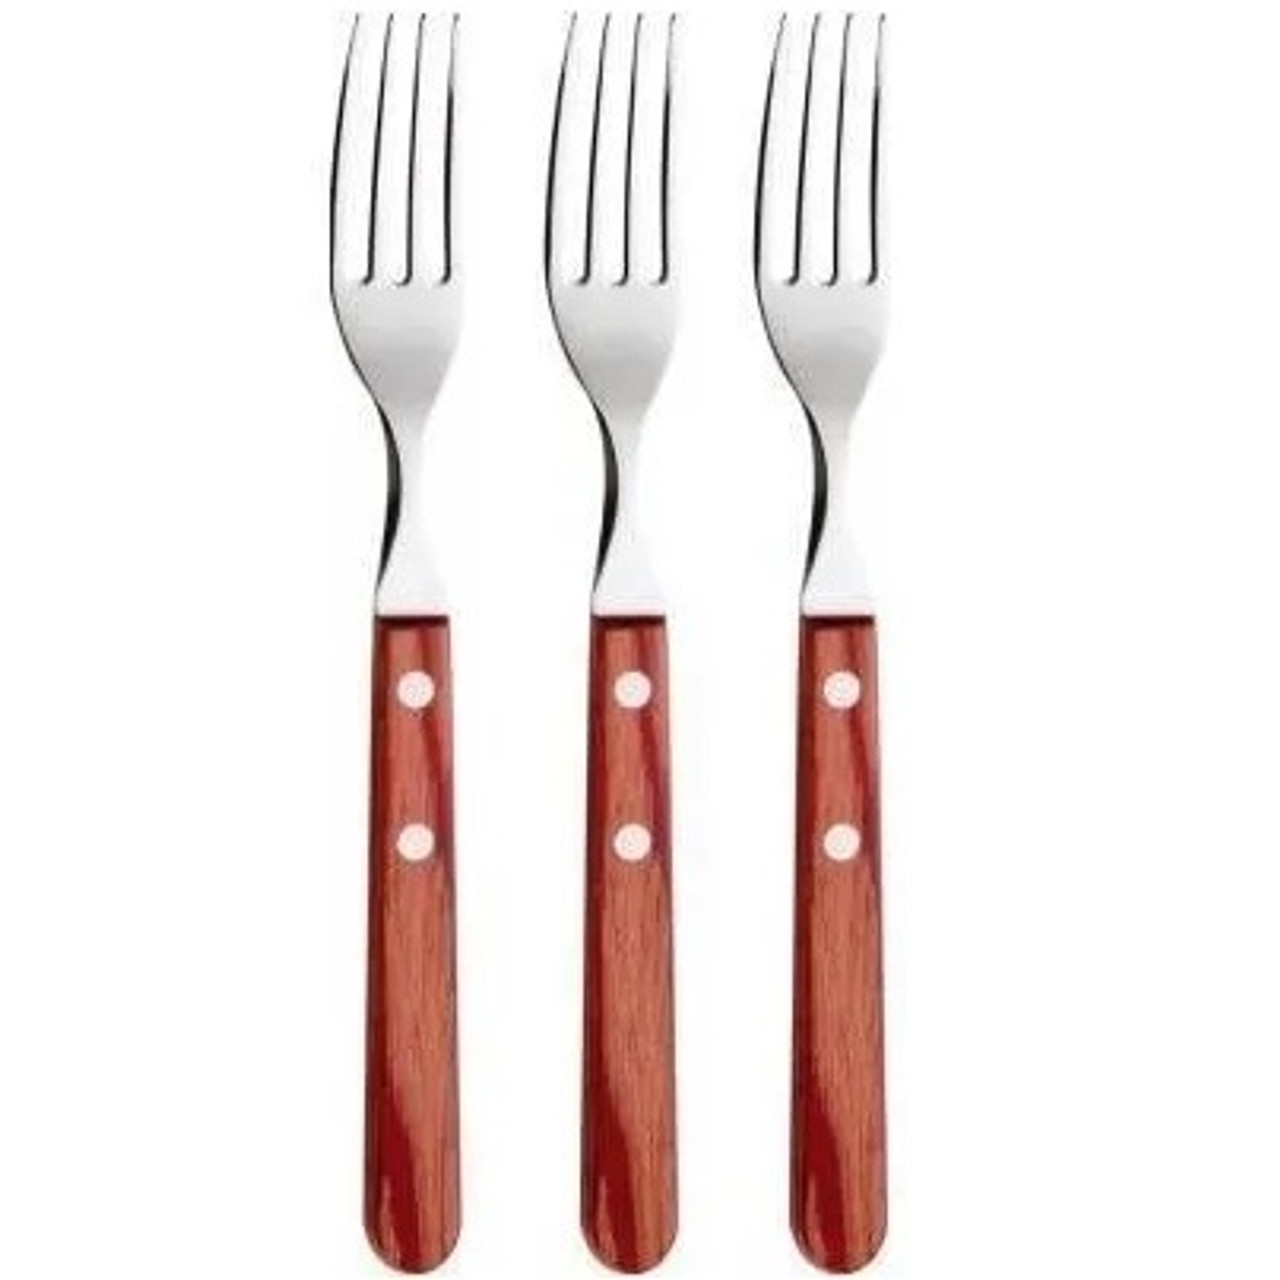 Tramontina Polywood Juego de Tenedores Stainless Steel Forks Set with  Polywood Handle (3 pc)